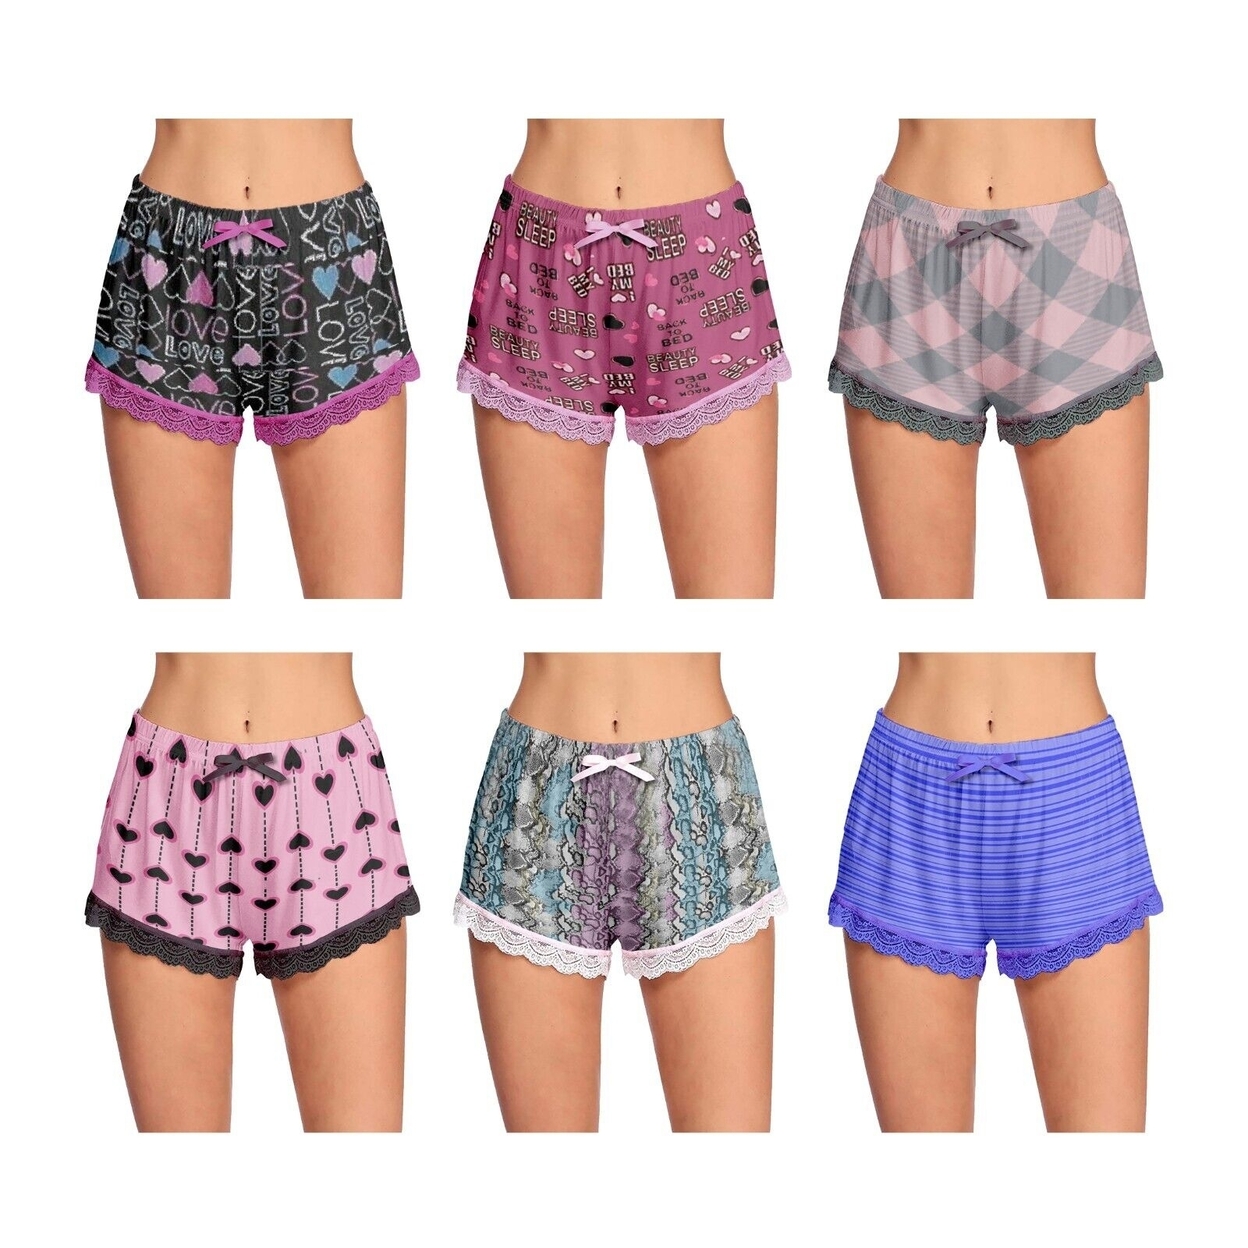 4-Pack: Women's Ultra-Soft Cozy Fun Printed Lace Trim Pajama Lounge Shorts - X-large, Shapes